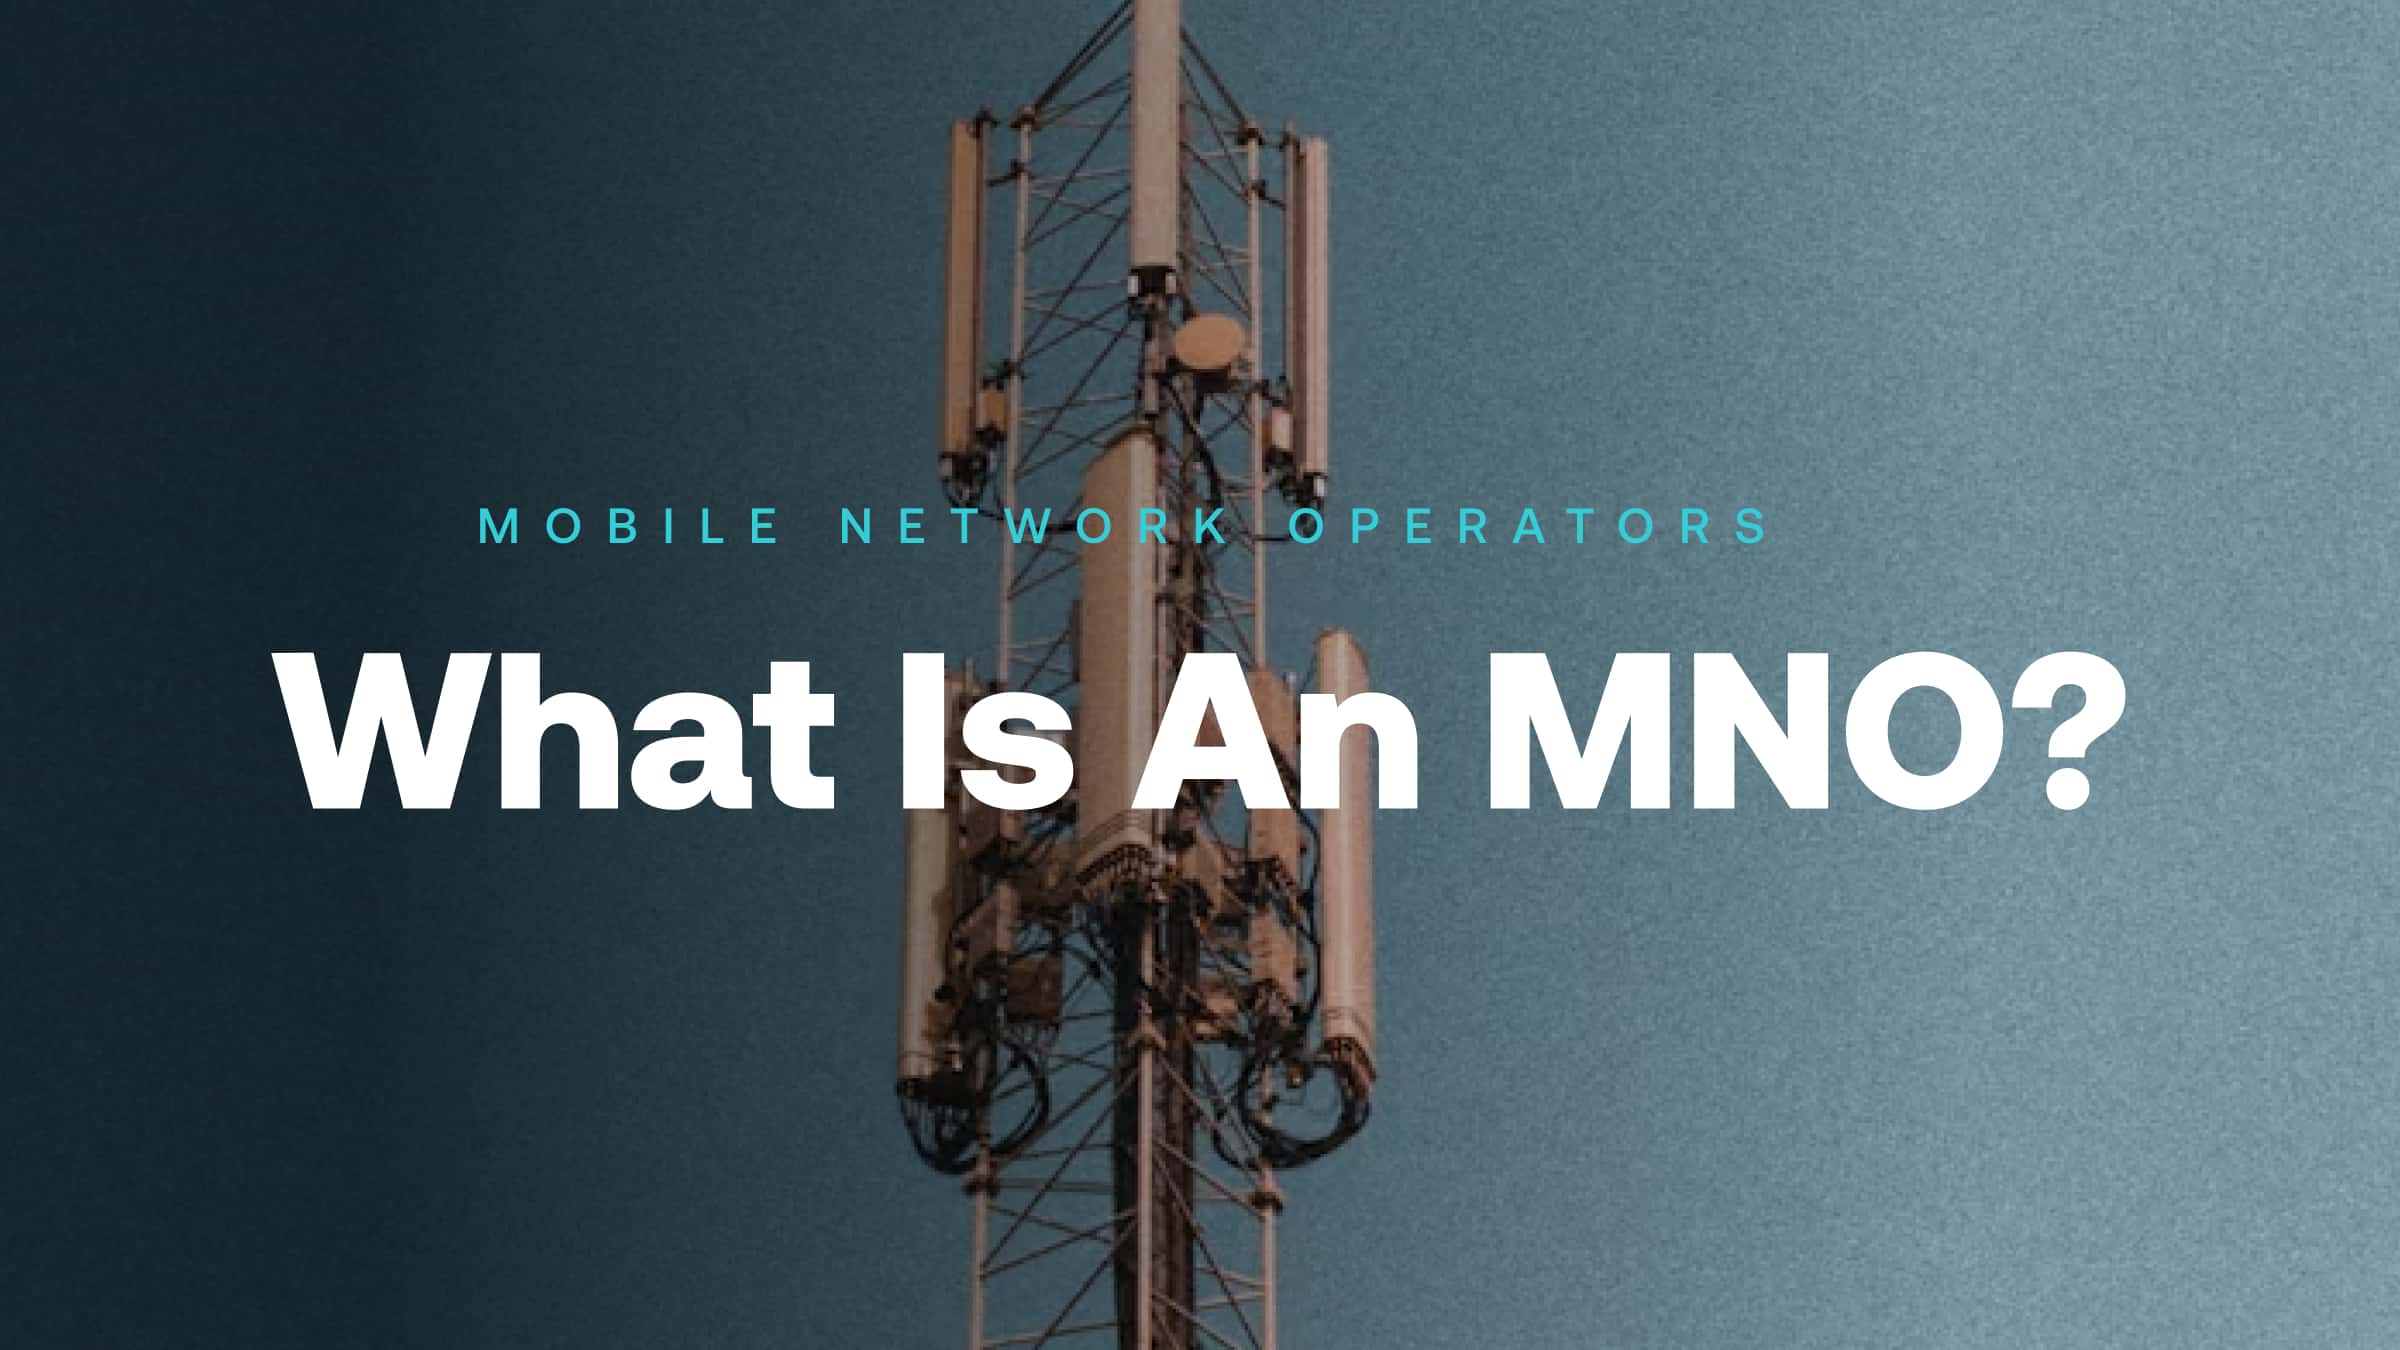 What Is a Mobile Network Operator (MNO)? – More info